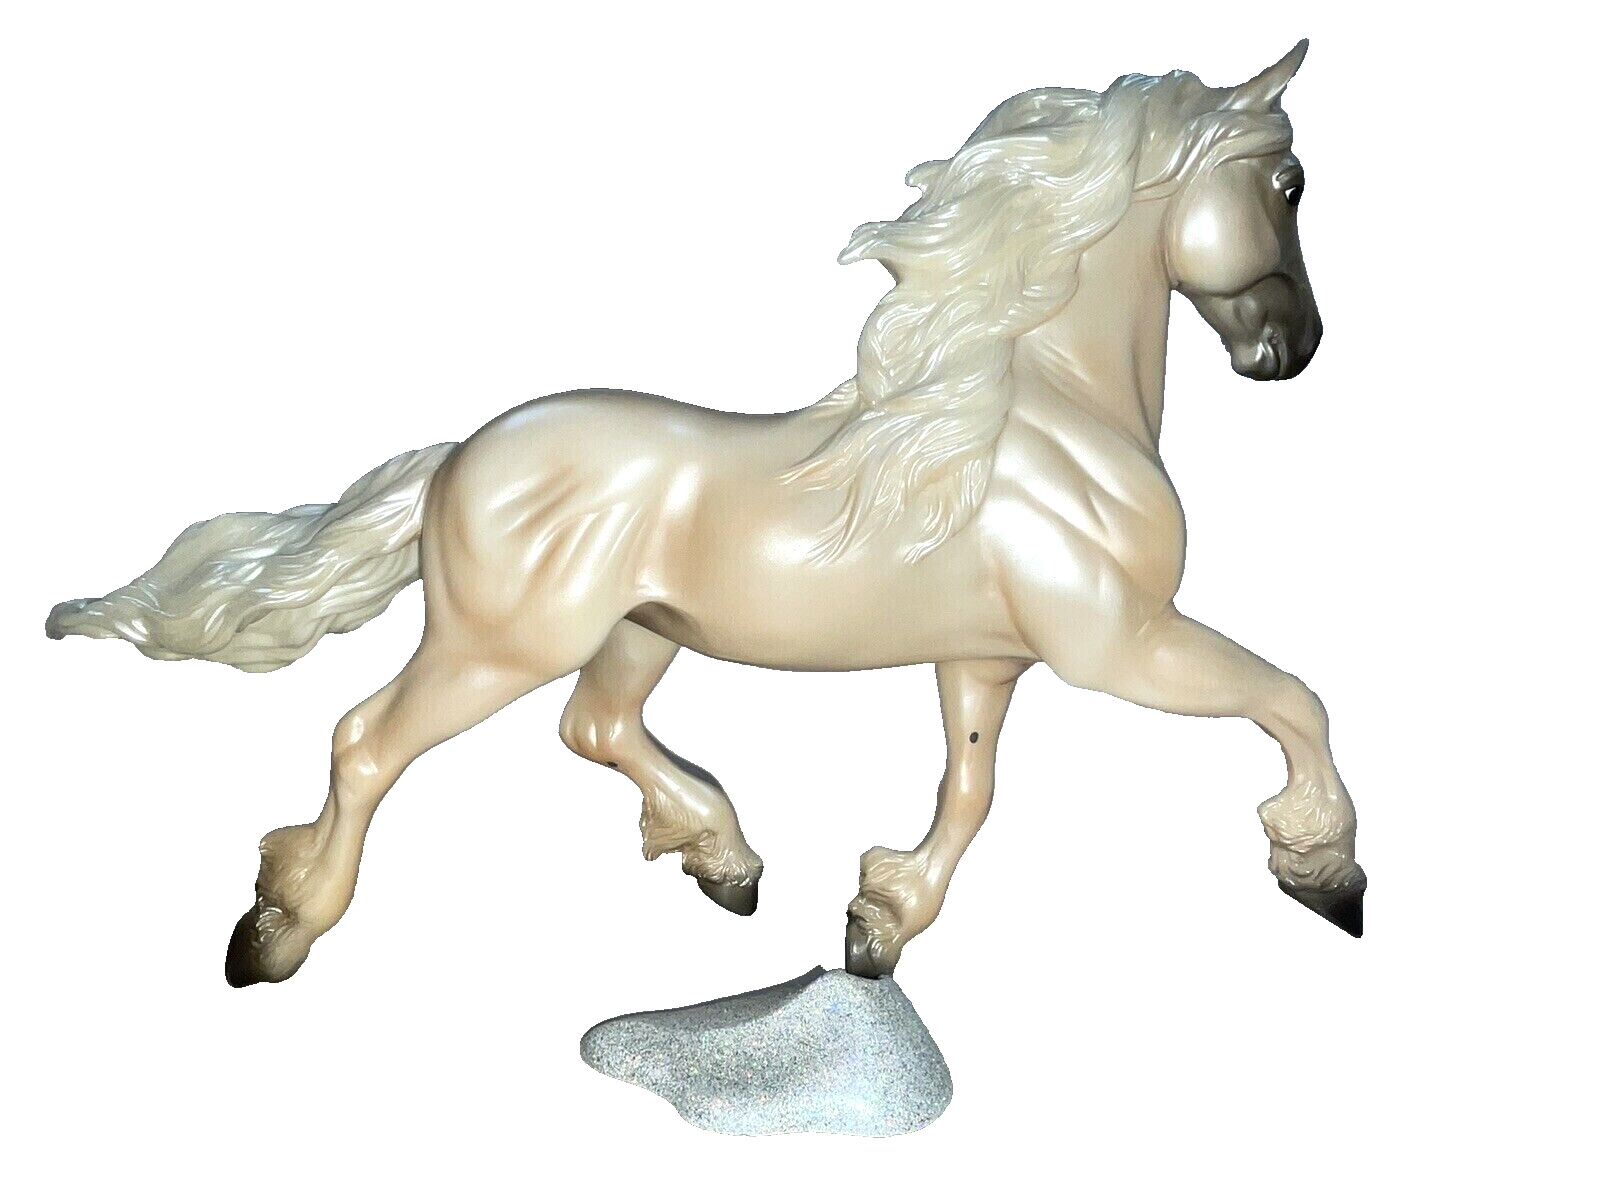 1188 BREYER 2008 CHRISTMAS PEARL HORSE NOELLE RETIRED 2008 EXCELLENT CONDITION